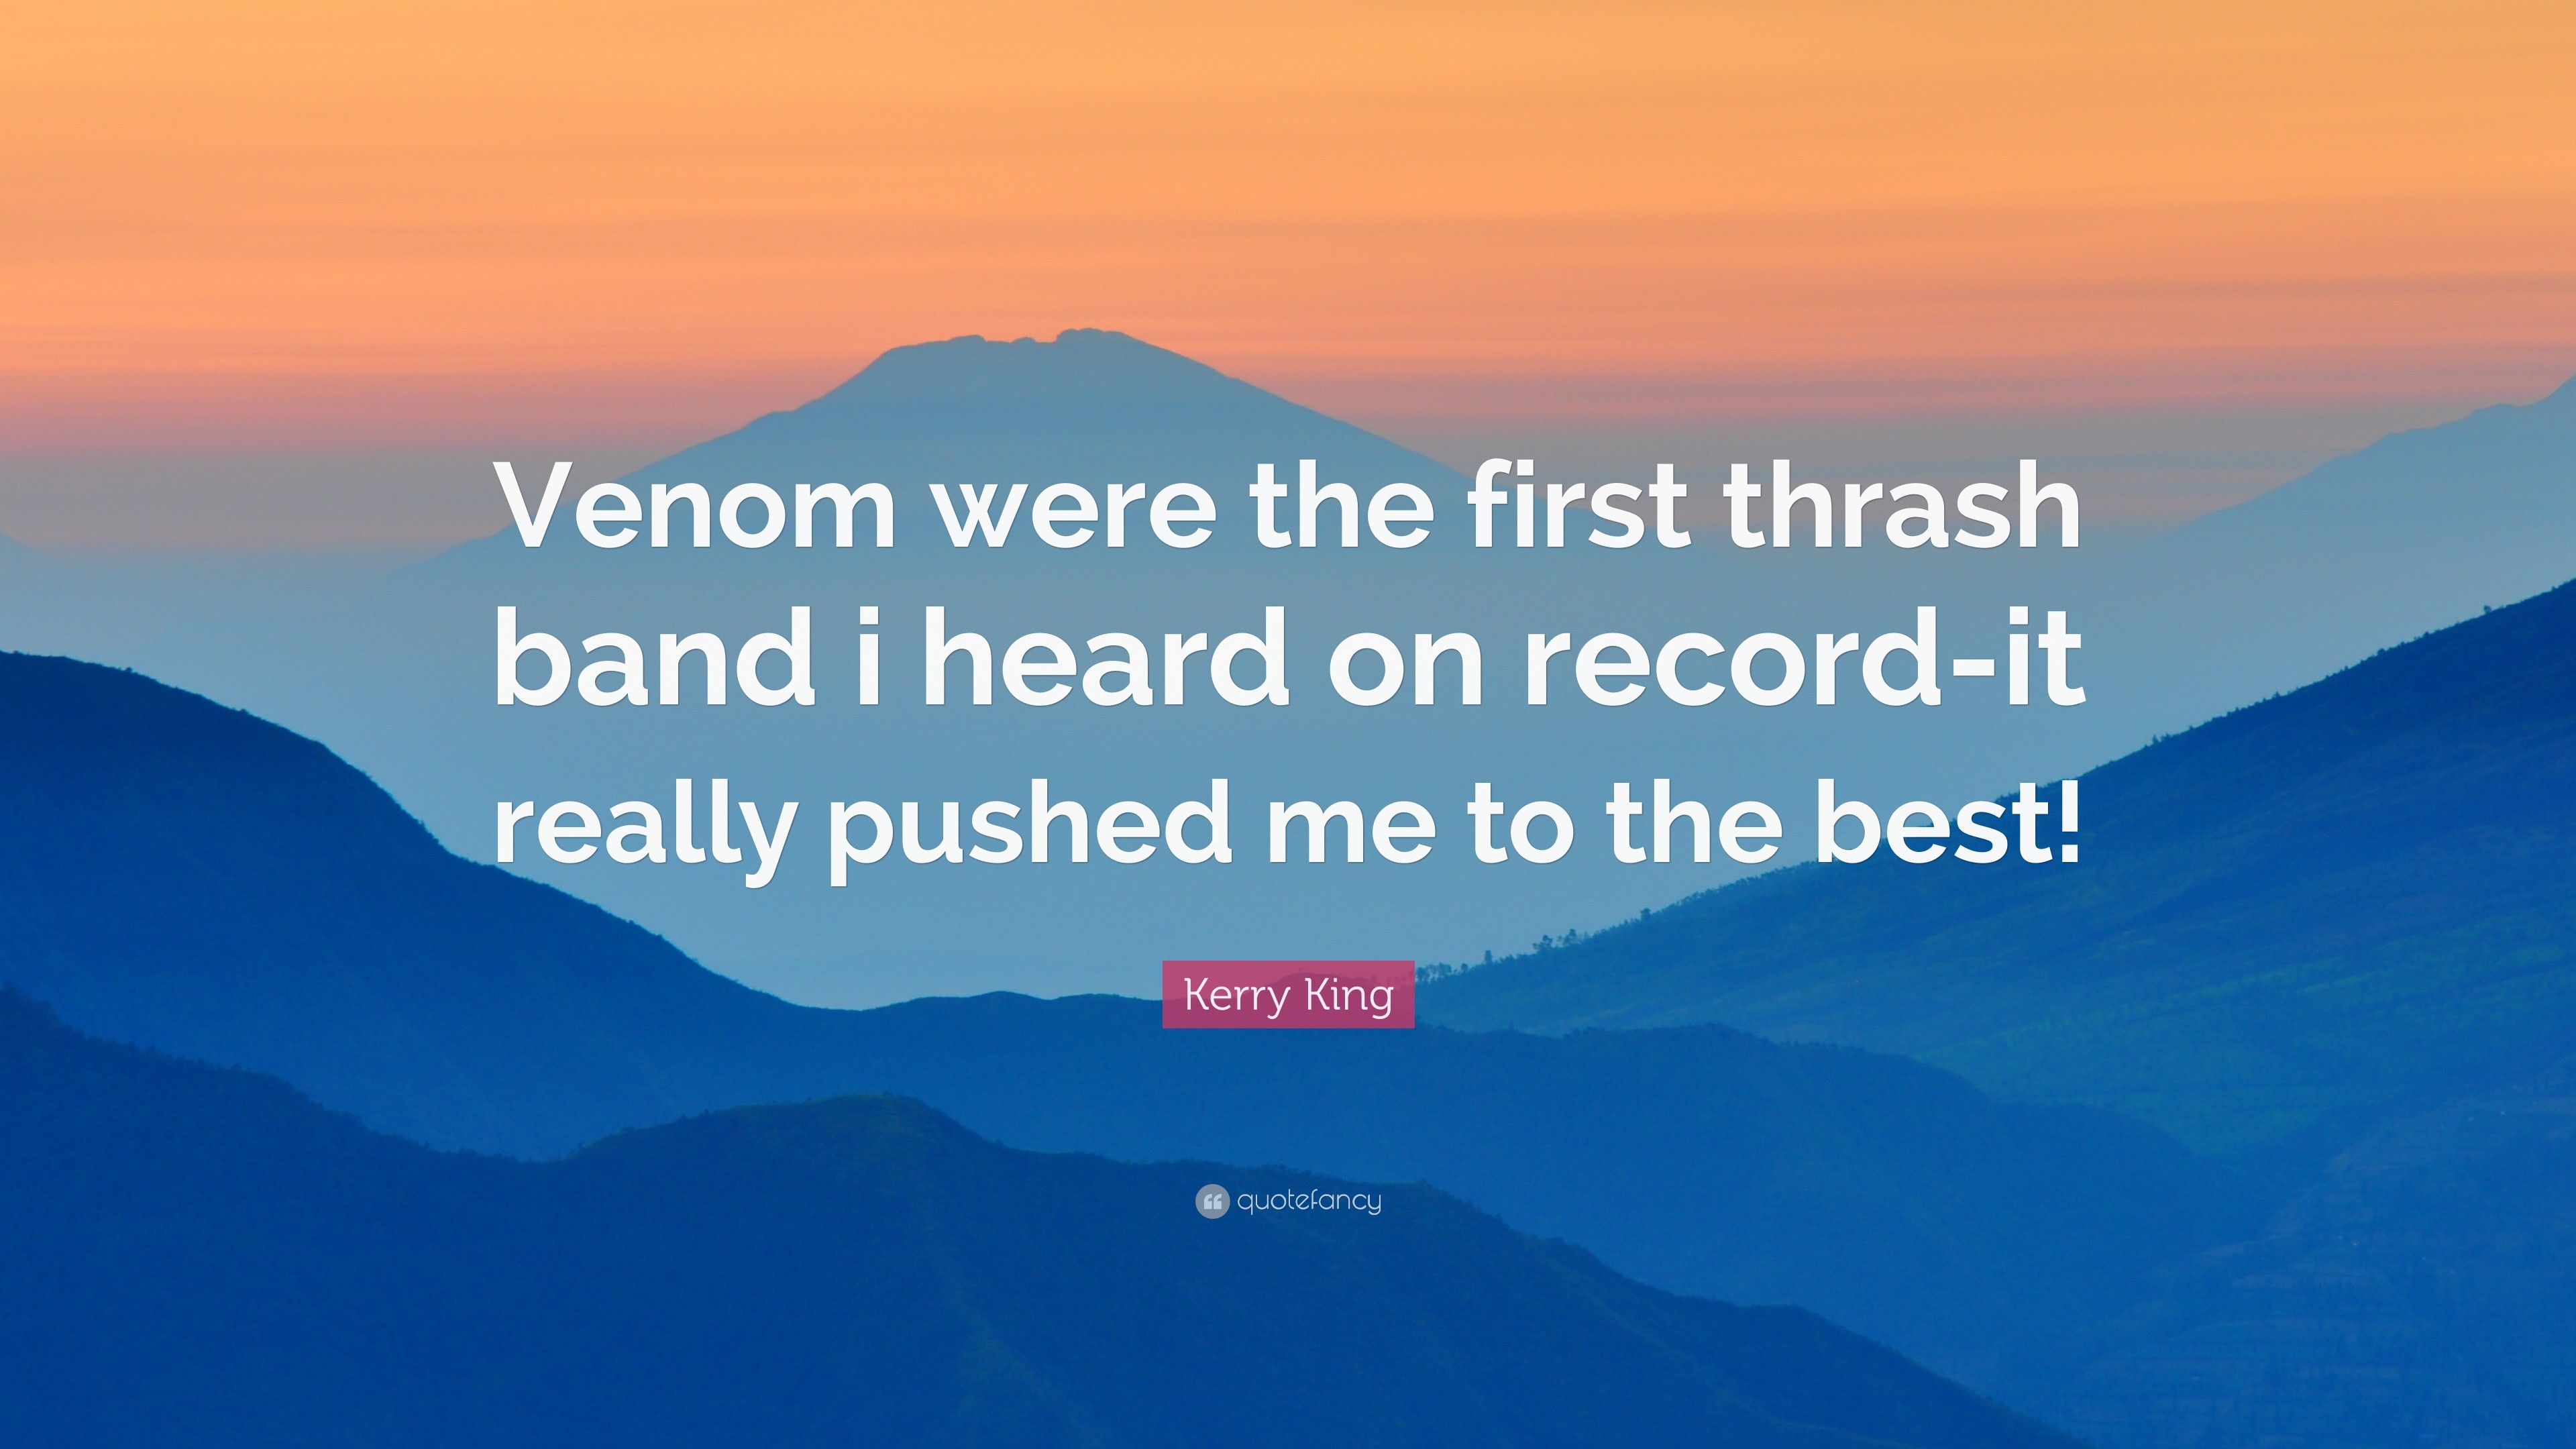 3840x2160 Kerry King Quote: “Venom were the first thrash band i heard on record-